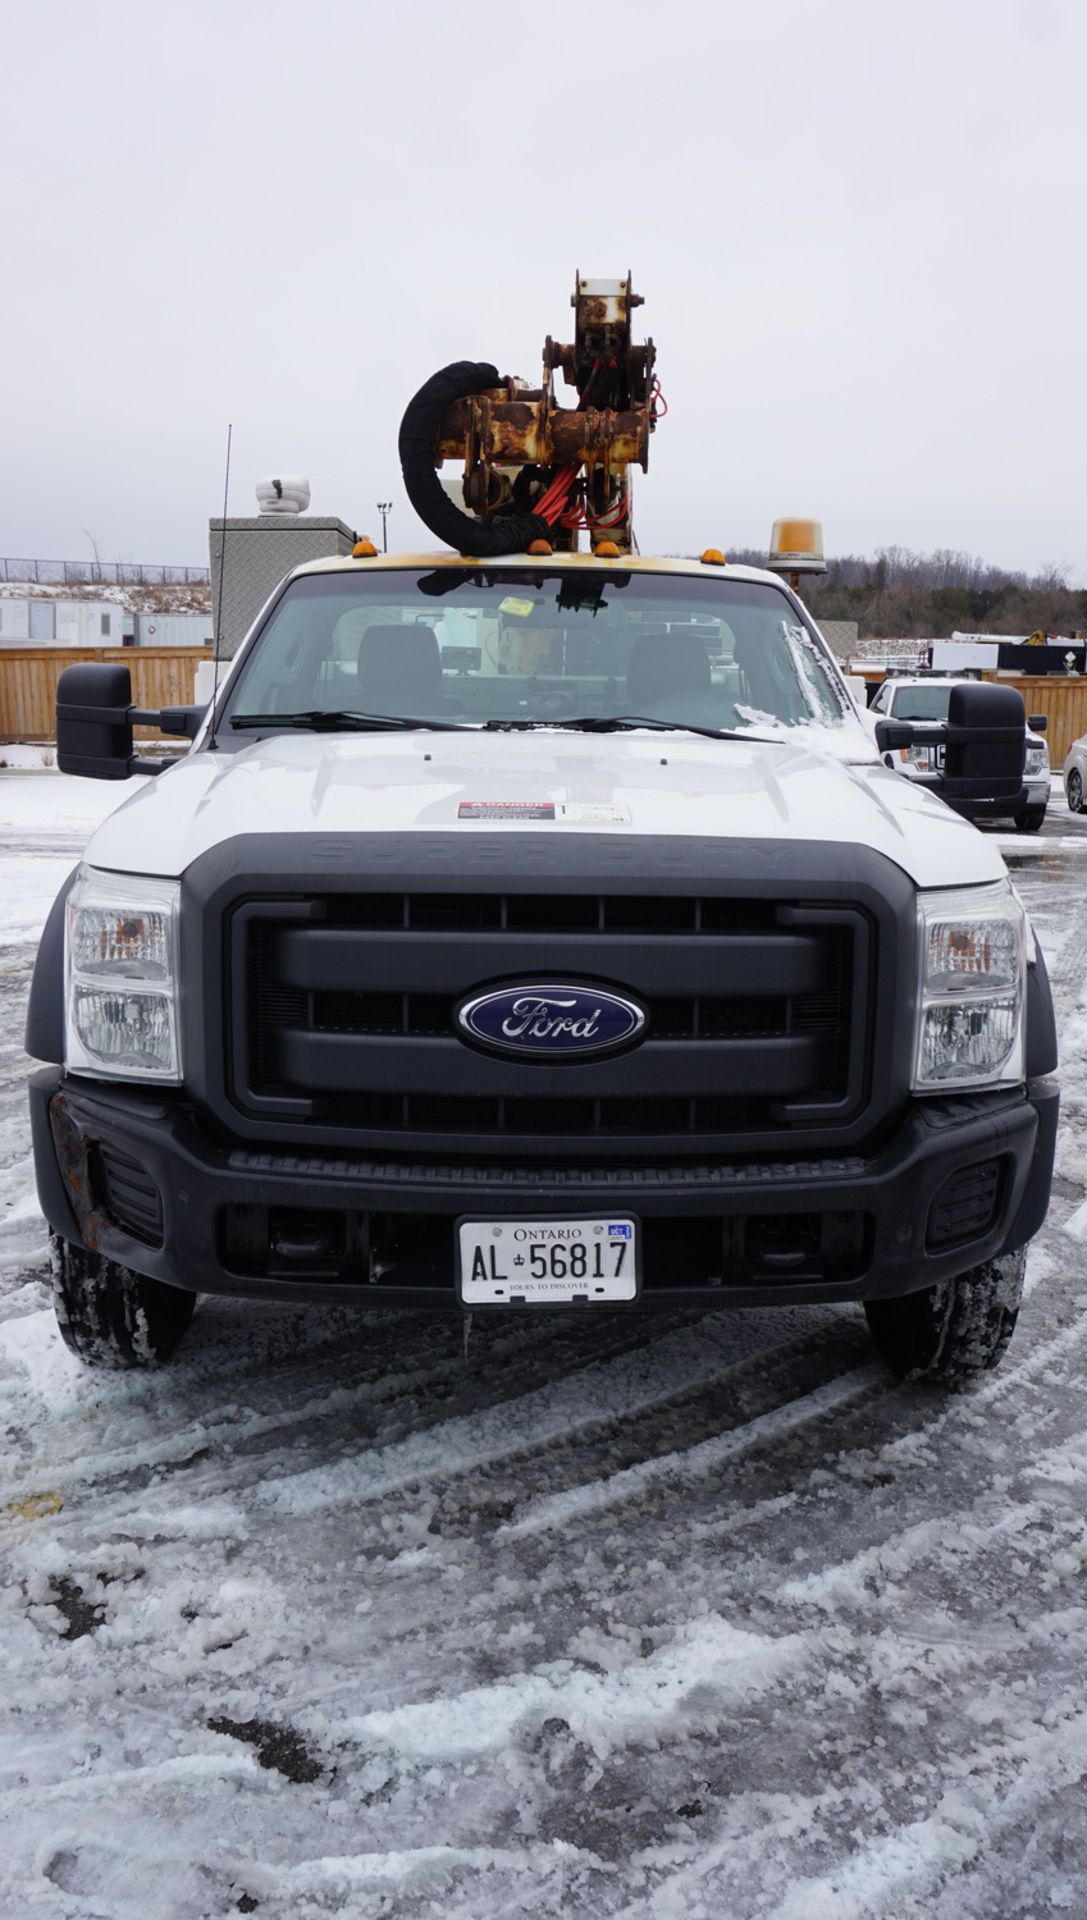 2015 ALTEC AT37G ARTICULATING TELESCOPIC BOOM & BUCKET MOUNTED ON 2015 FORD F550XL SUPER DUTY - Image 2 of 21